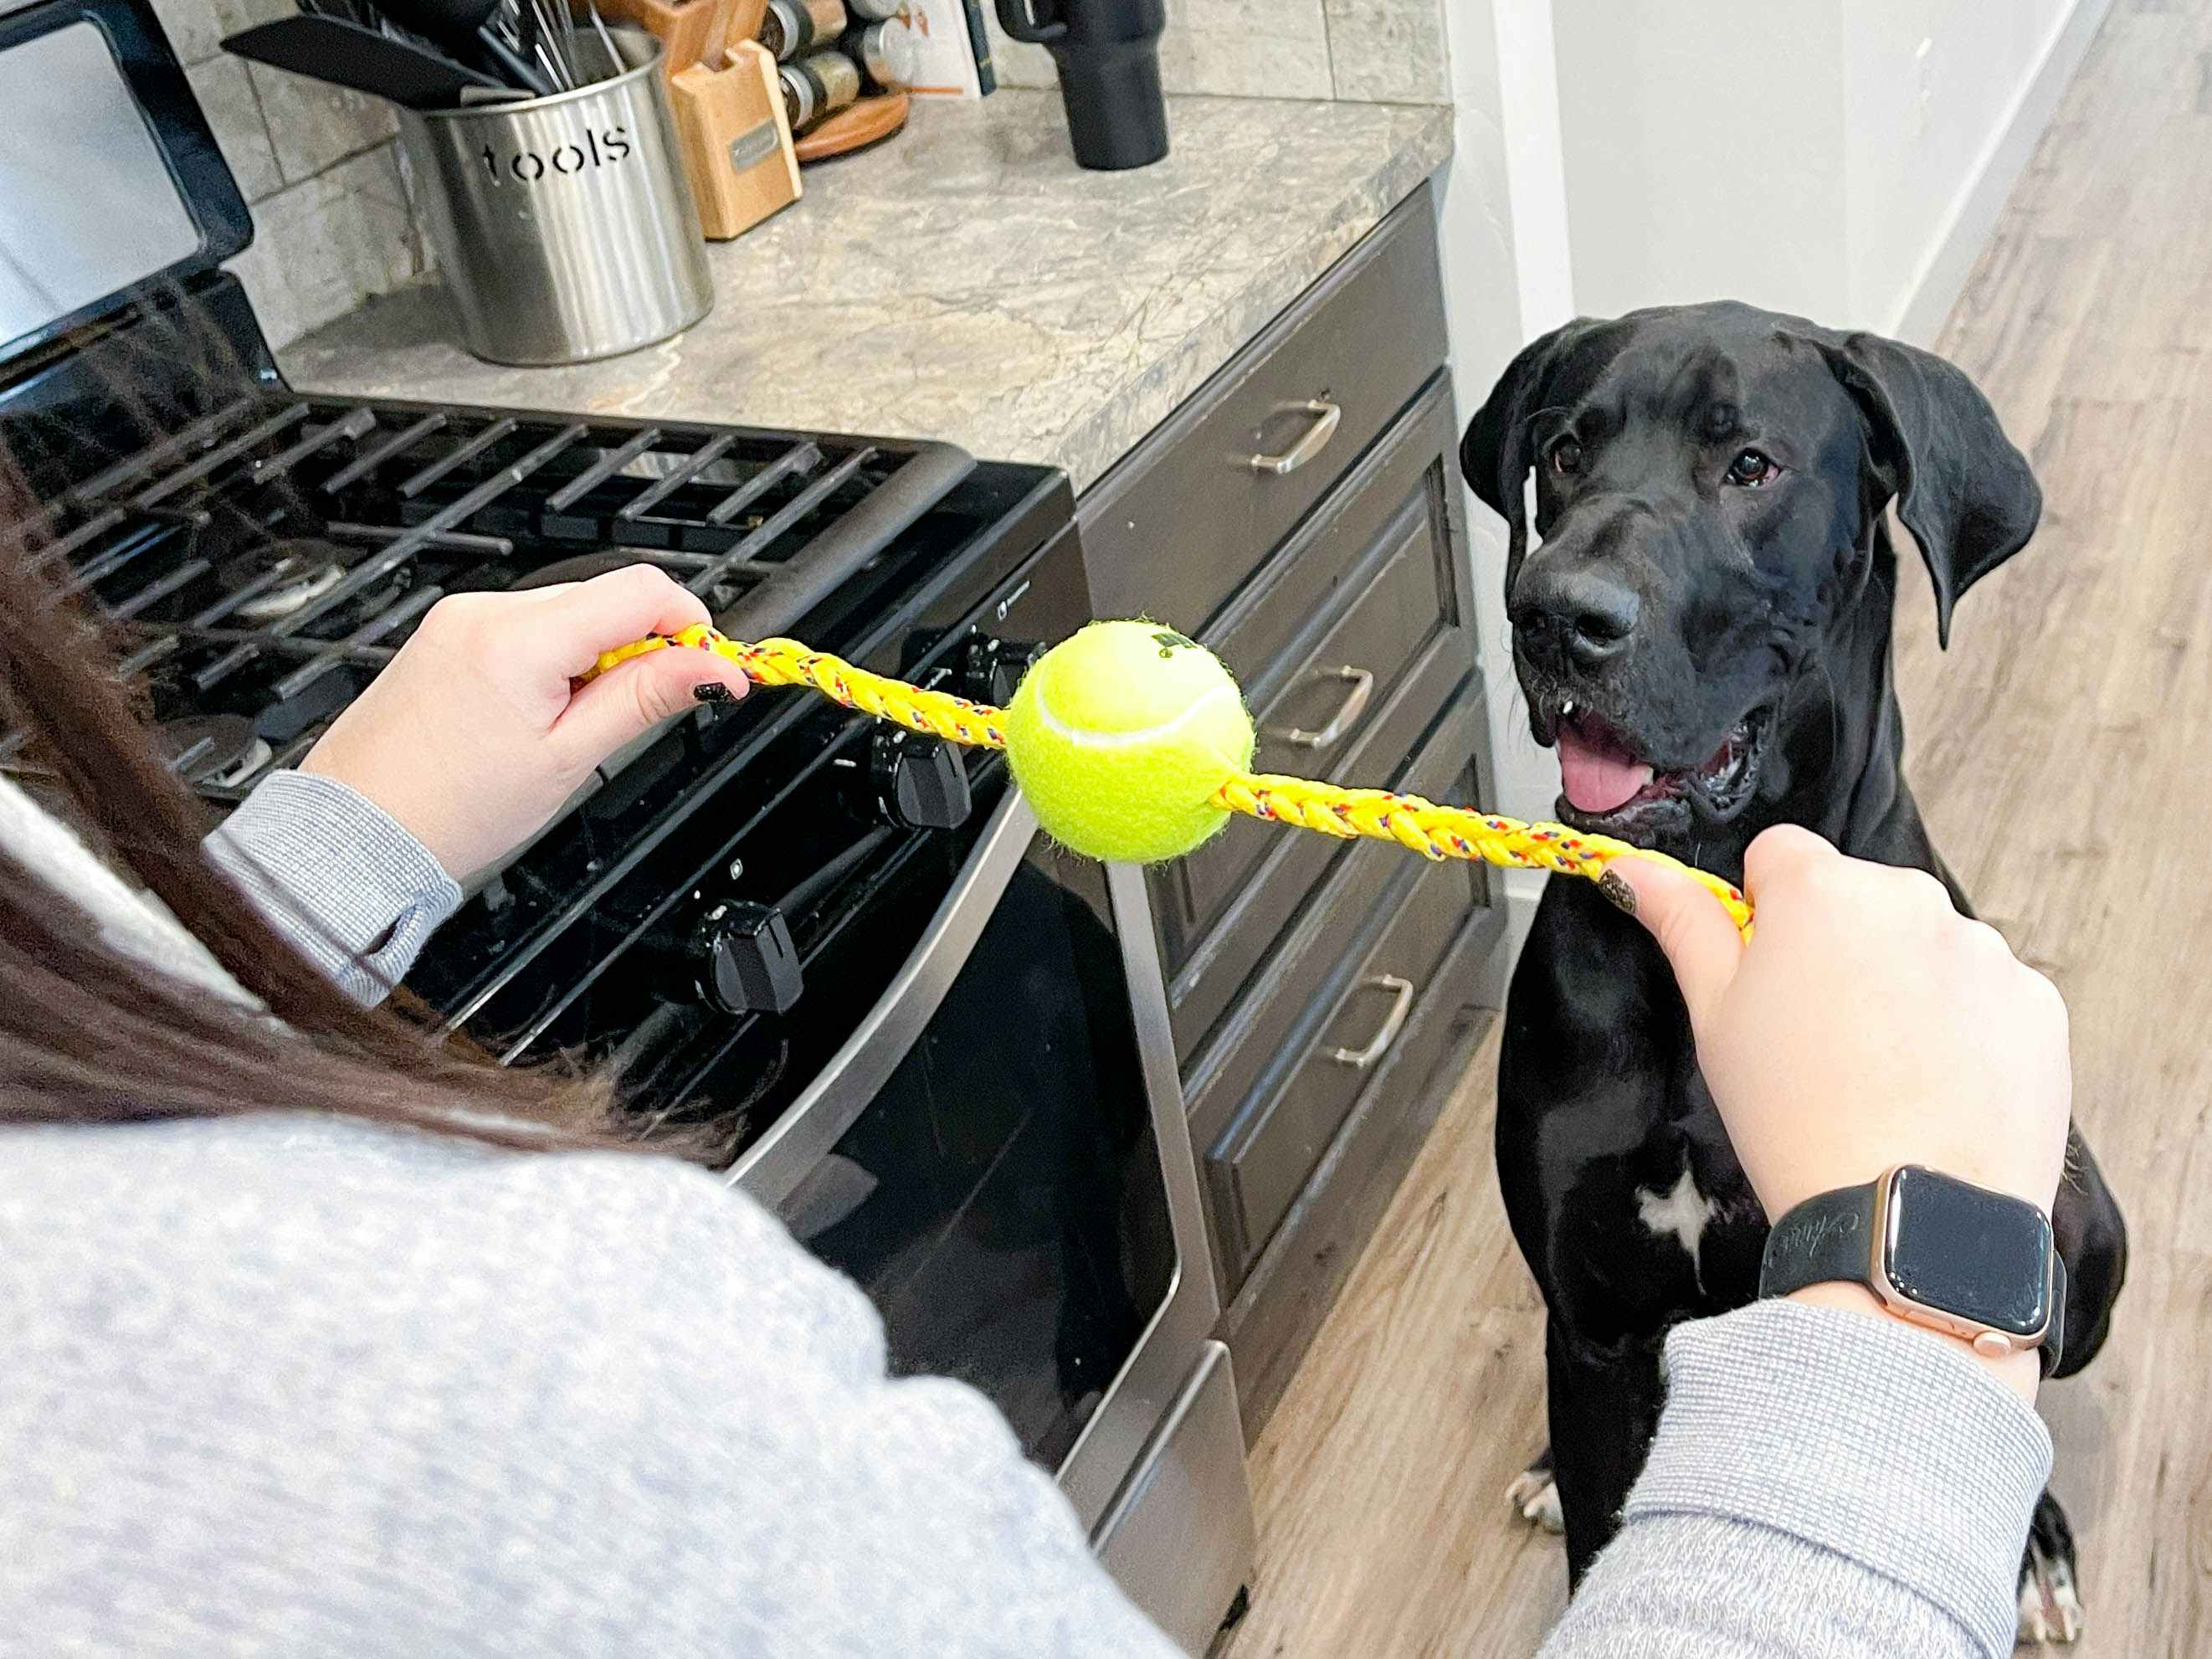 https://prod-cdn-thekrazycouponlady.imgix.net/wp-content/uploads/2023/03/diy-easy-dog-toys-rope-tennis-ball-3-1678130614-1678130614.jpg?auto=format&fit=fill&q=25